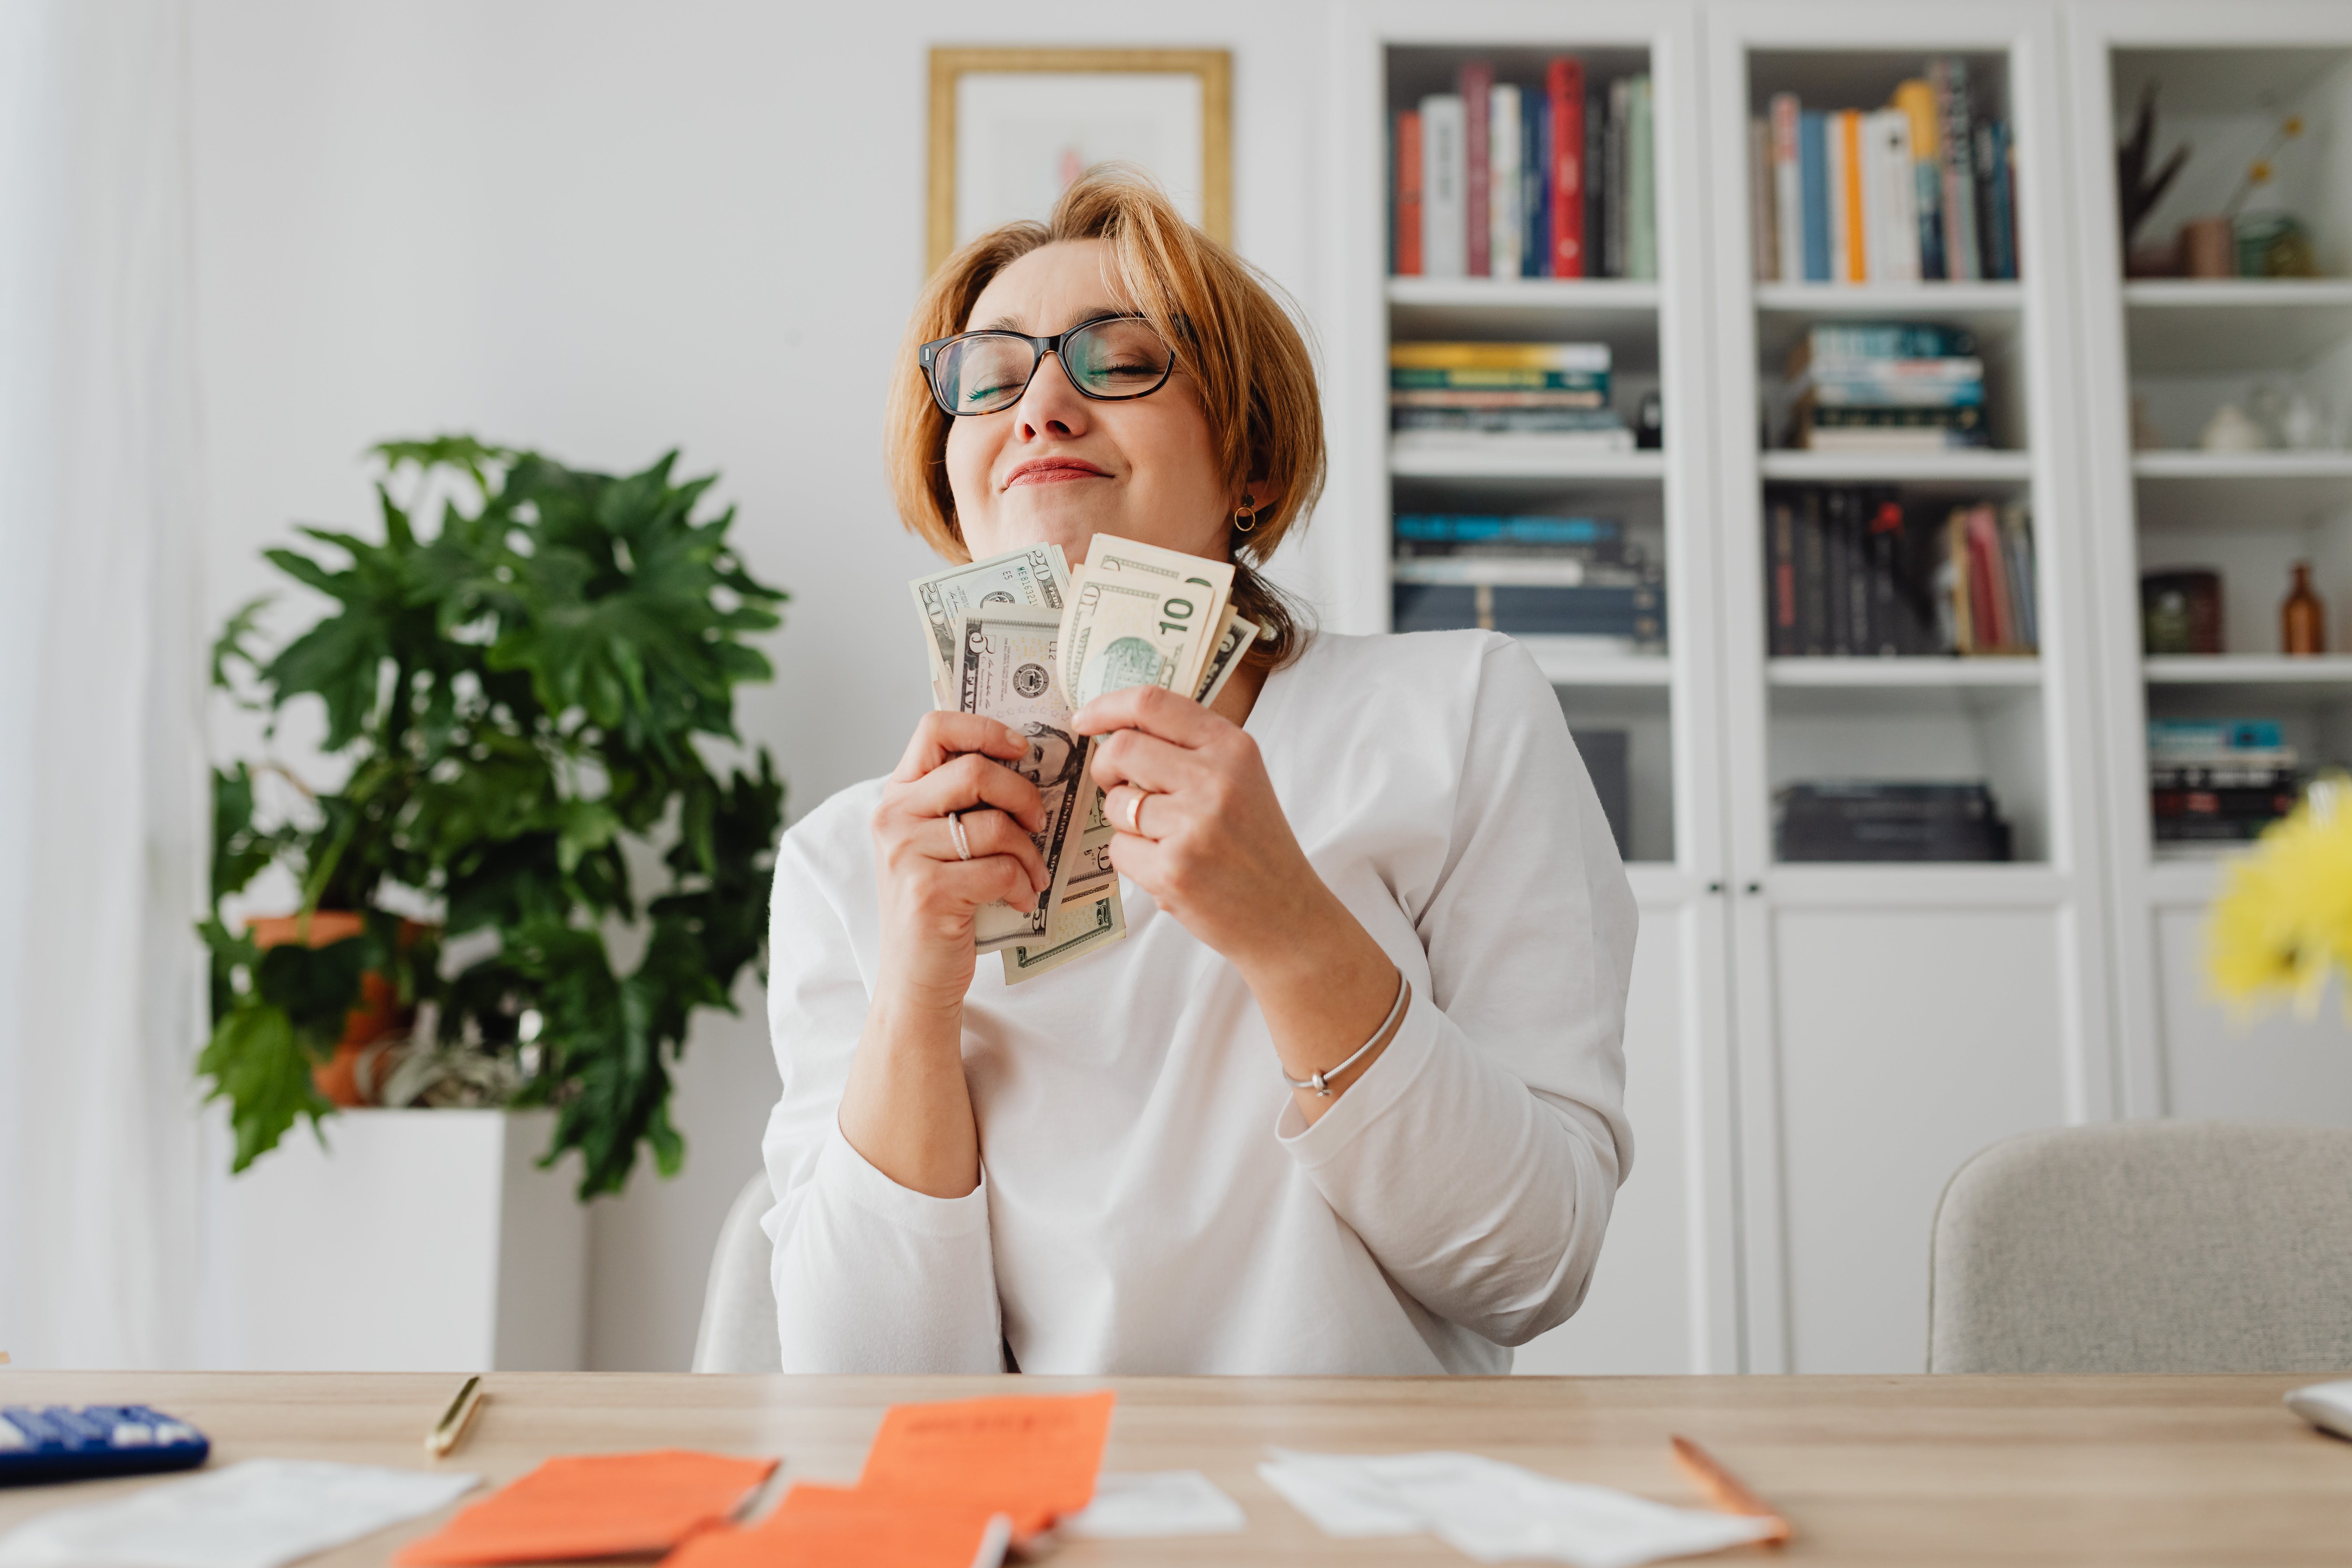 A woman holding money and smiling. | Source: Pexels